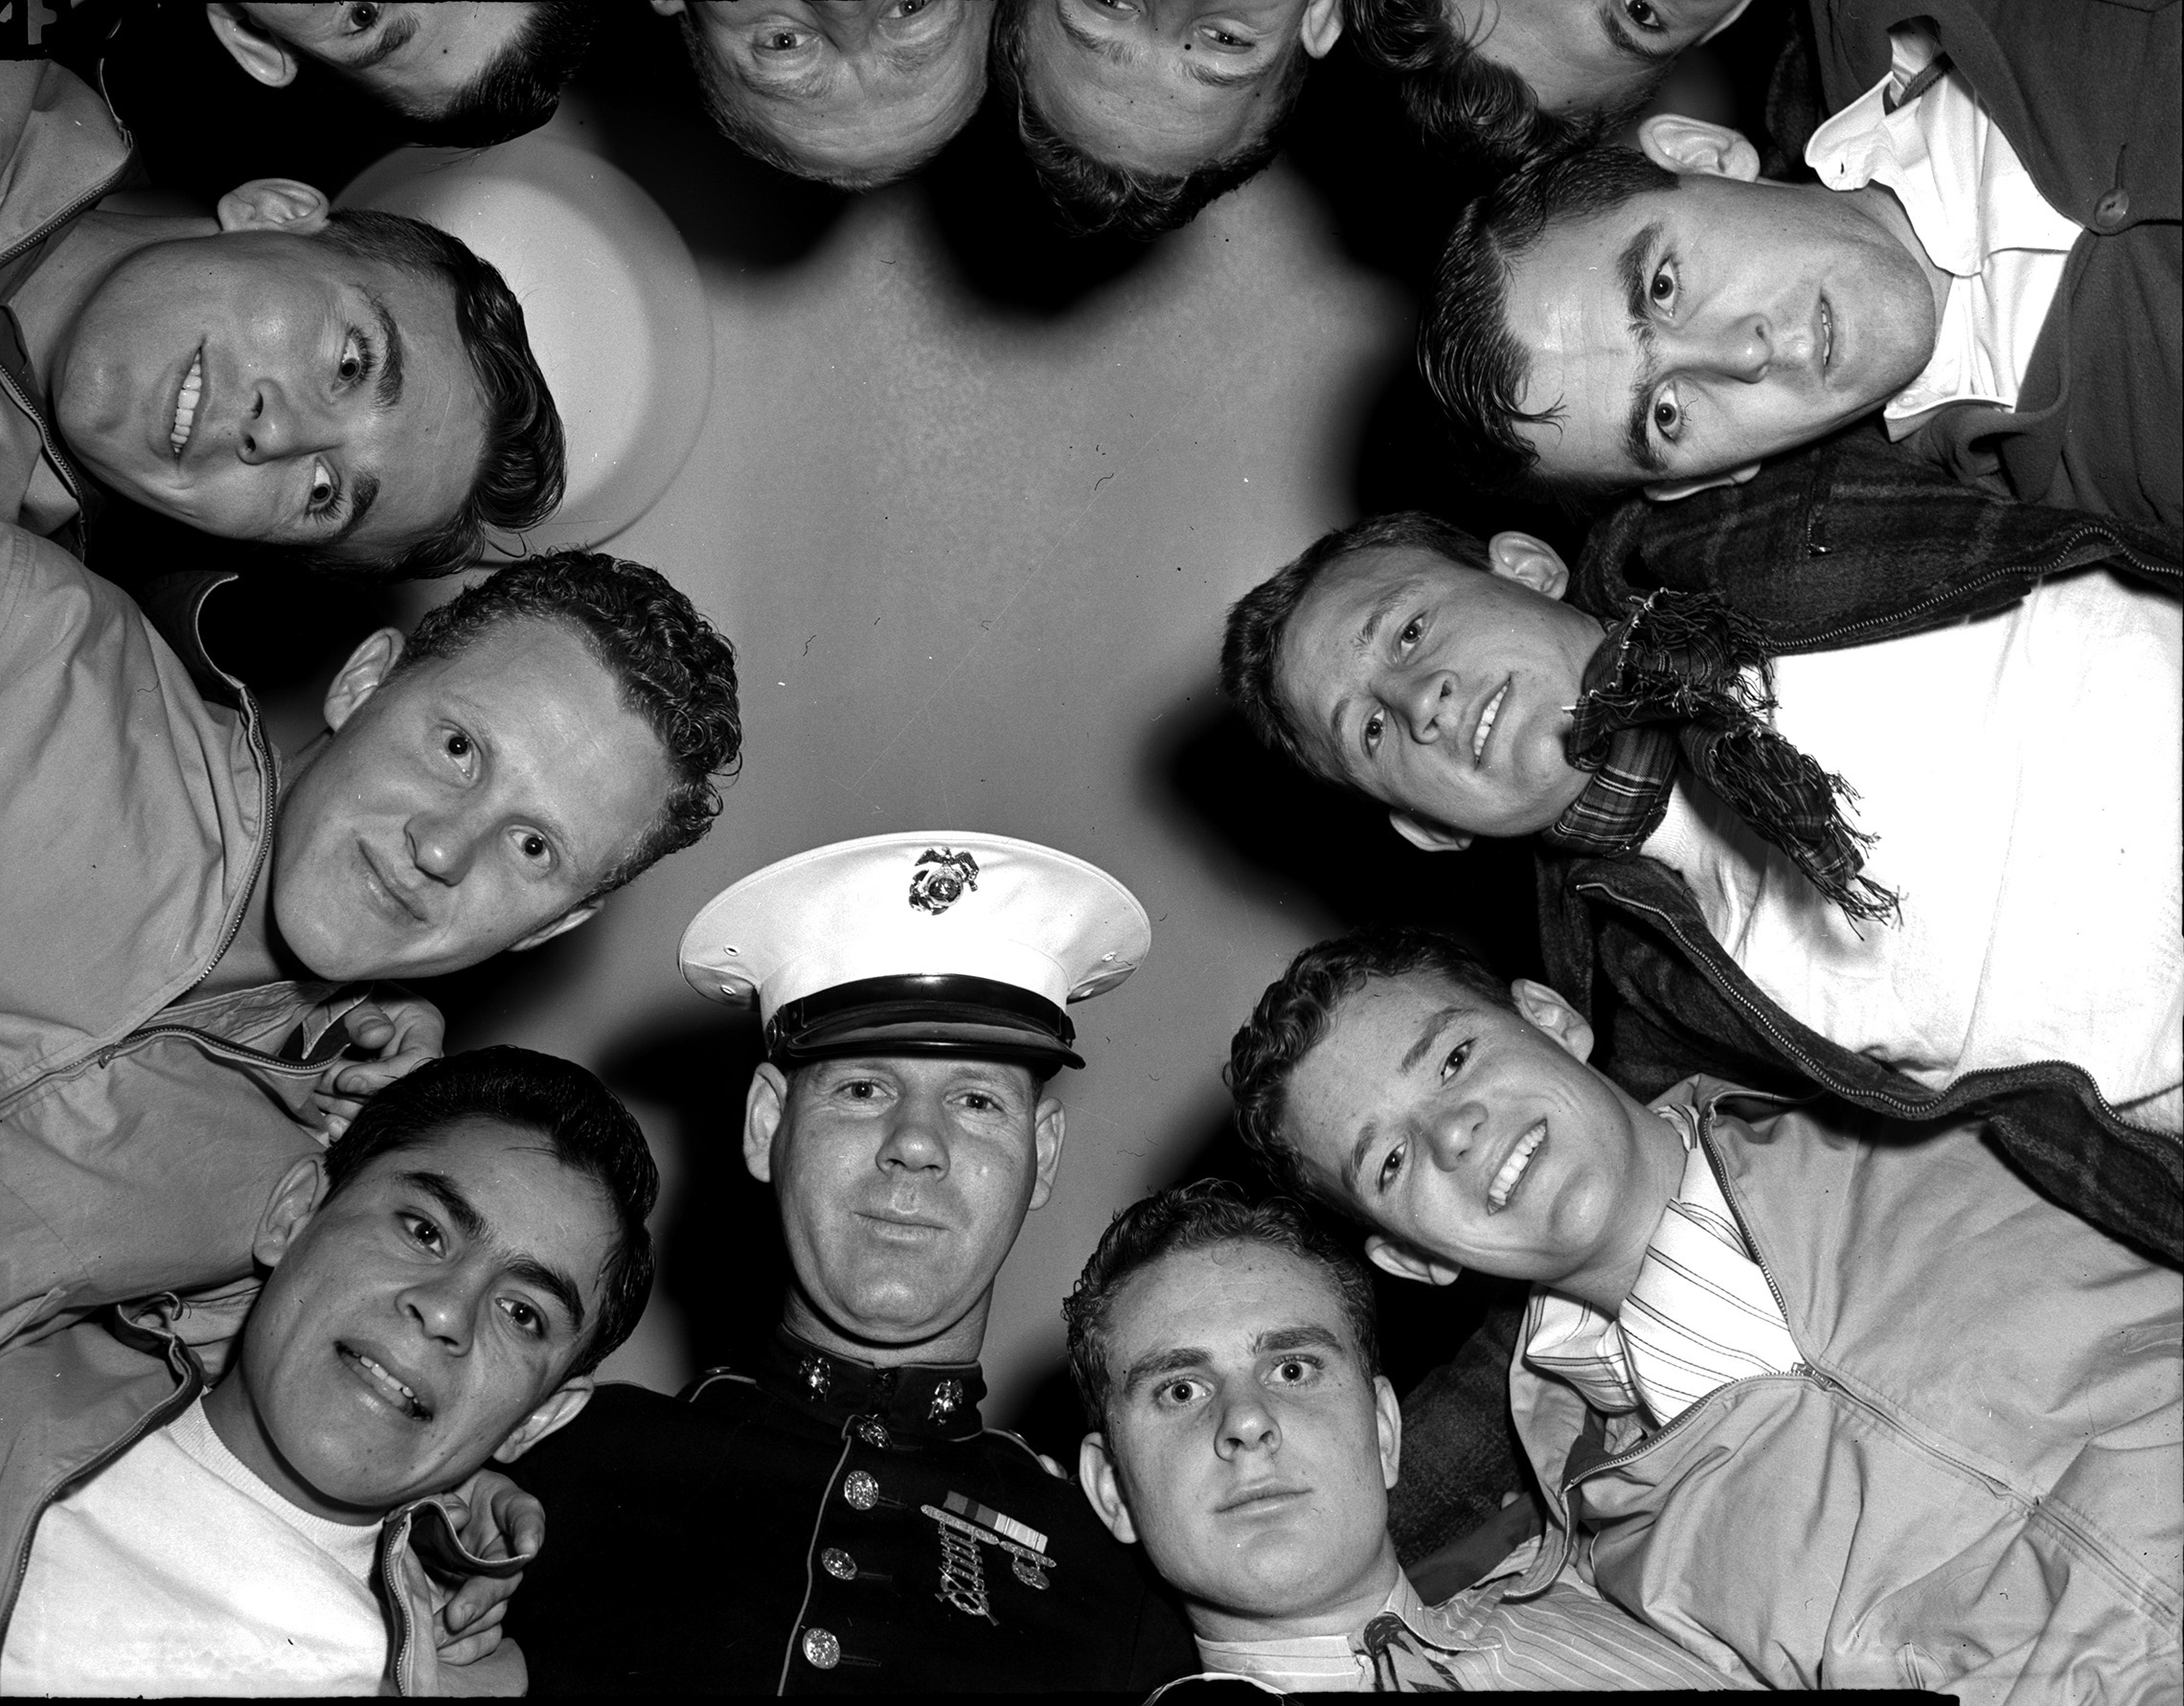 Seven of the ten Masonic Home football players who joined the Marines are shown huddled up with their recruiting officer, Sergeant Fowler. Most of the men are smiling and looking down at the camera. Sergeant Fowler is wearing military uniform.